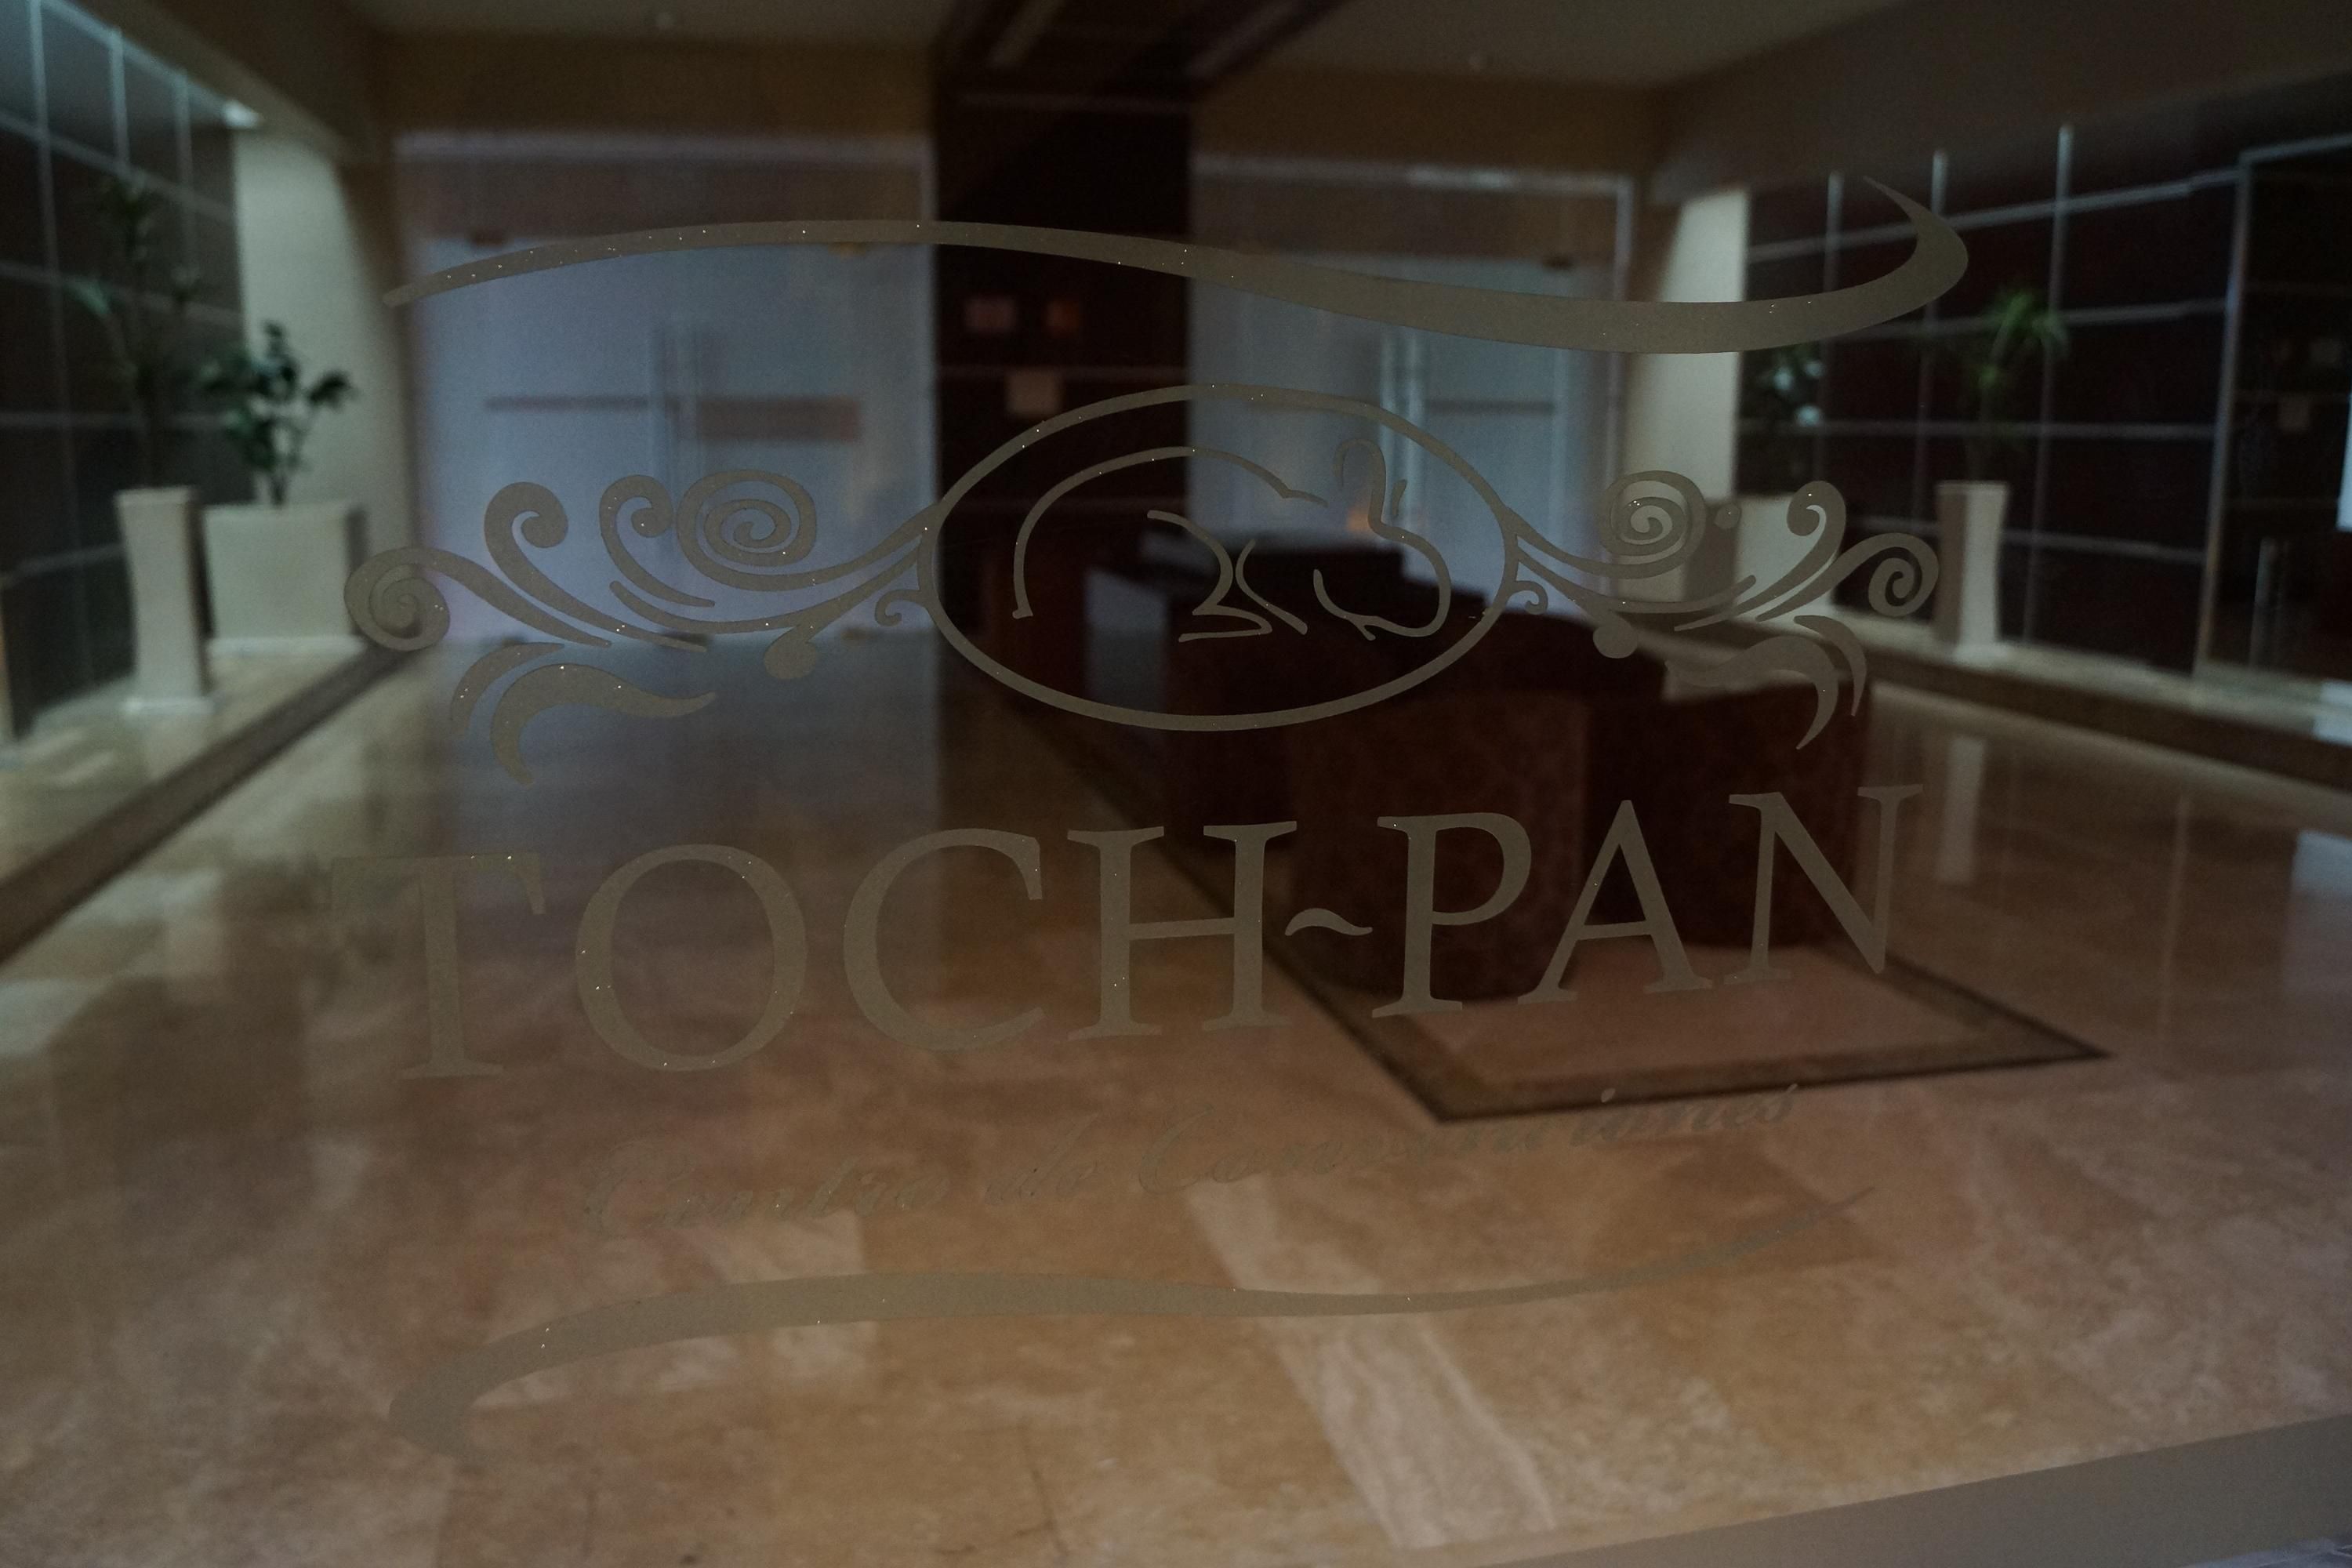 Tochpan convention center entrance